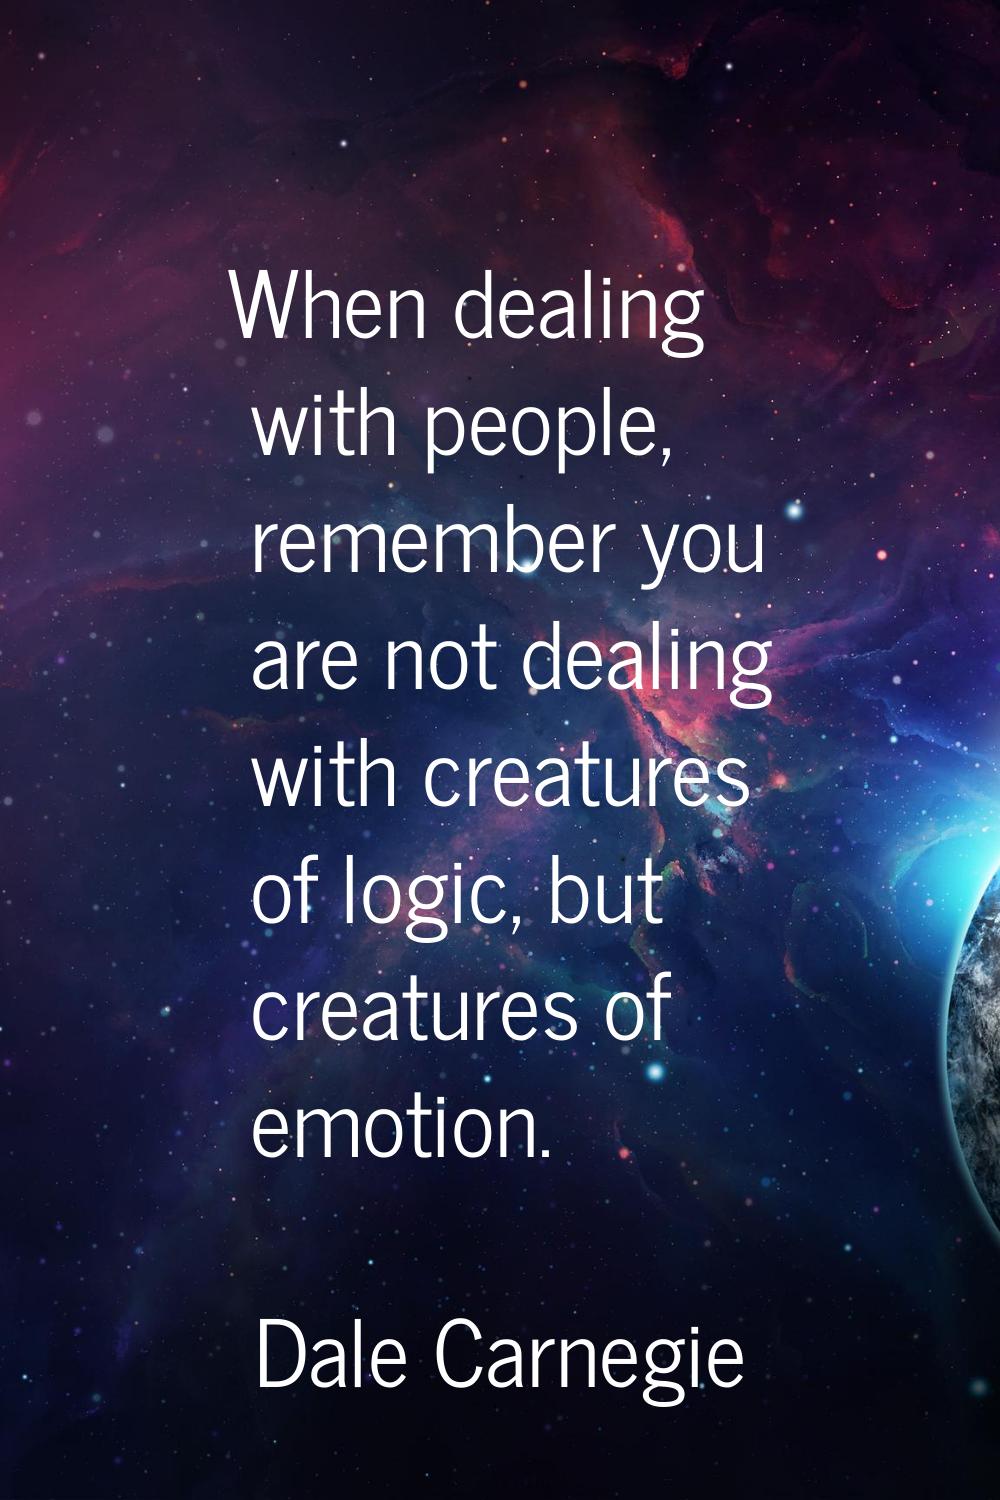 When dealing with people, remember you are not dealing with creatures of logic, but creatures of em